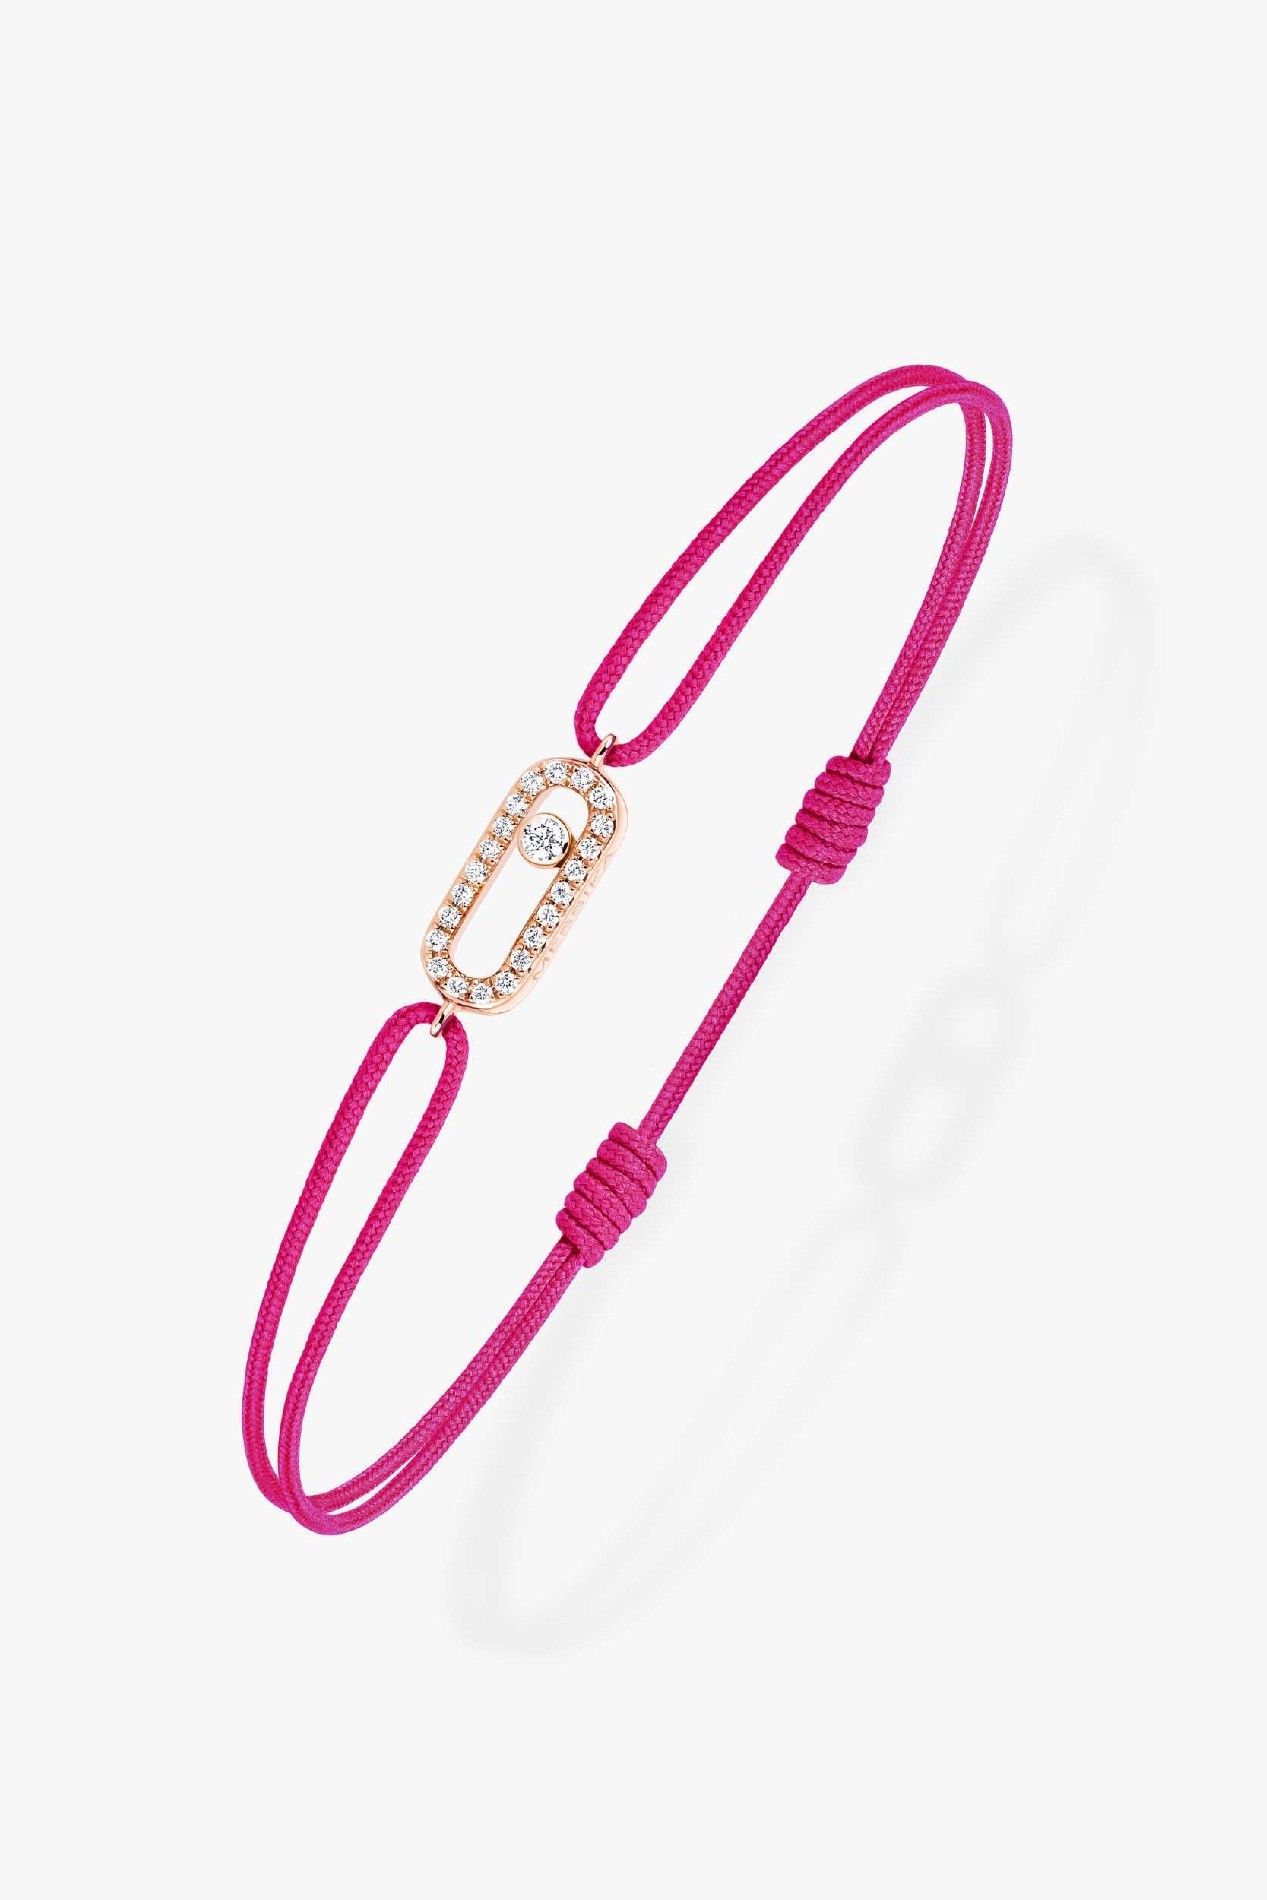 MOVE UNO PINK CORD BRACELET - Pink Cord